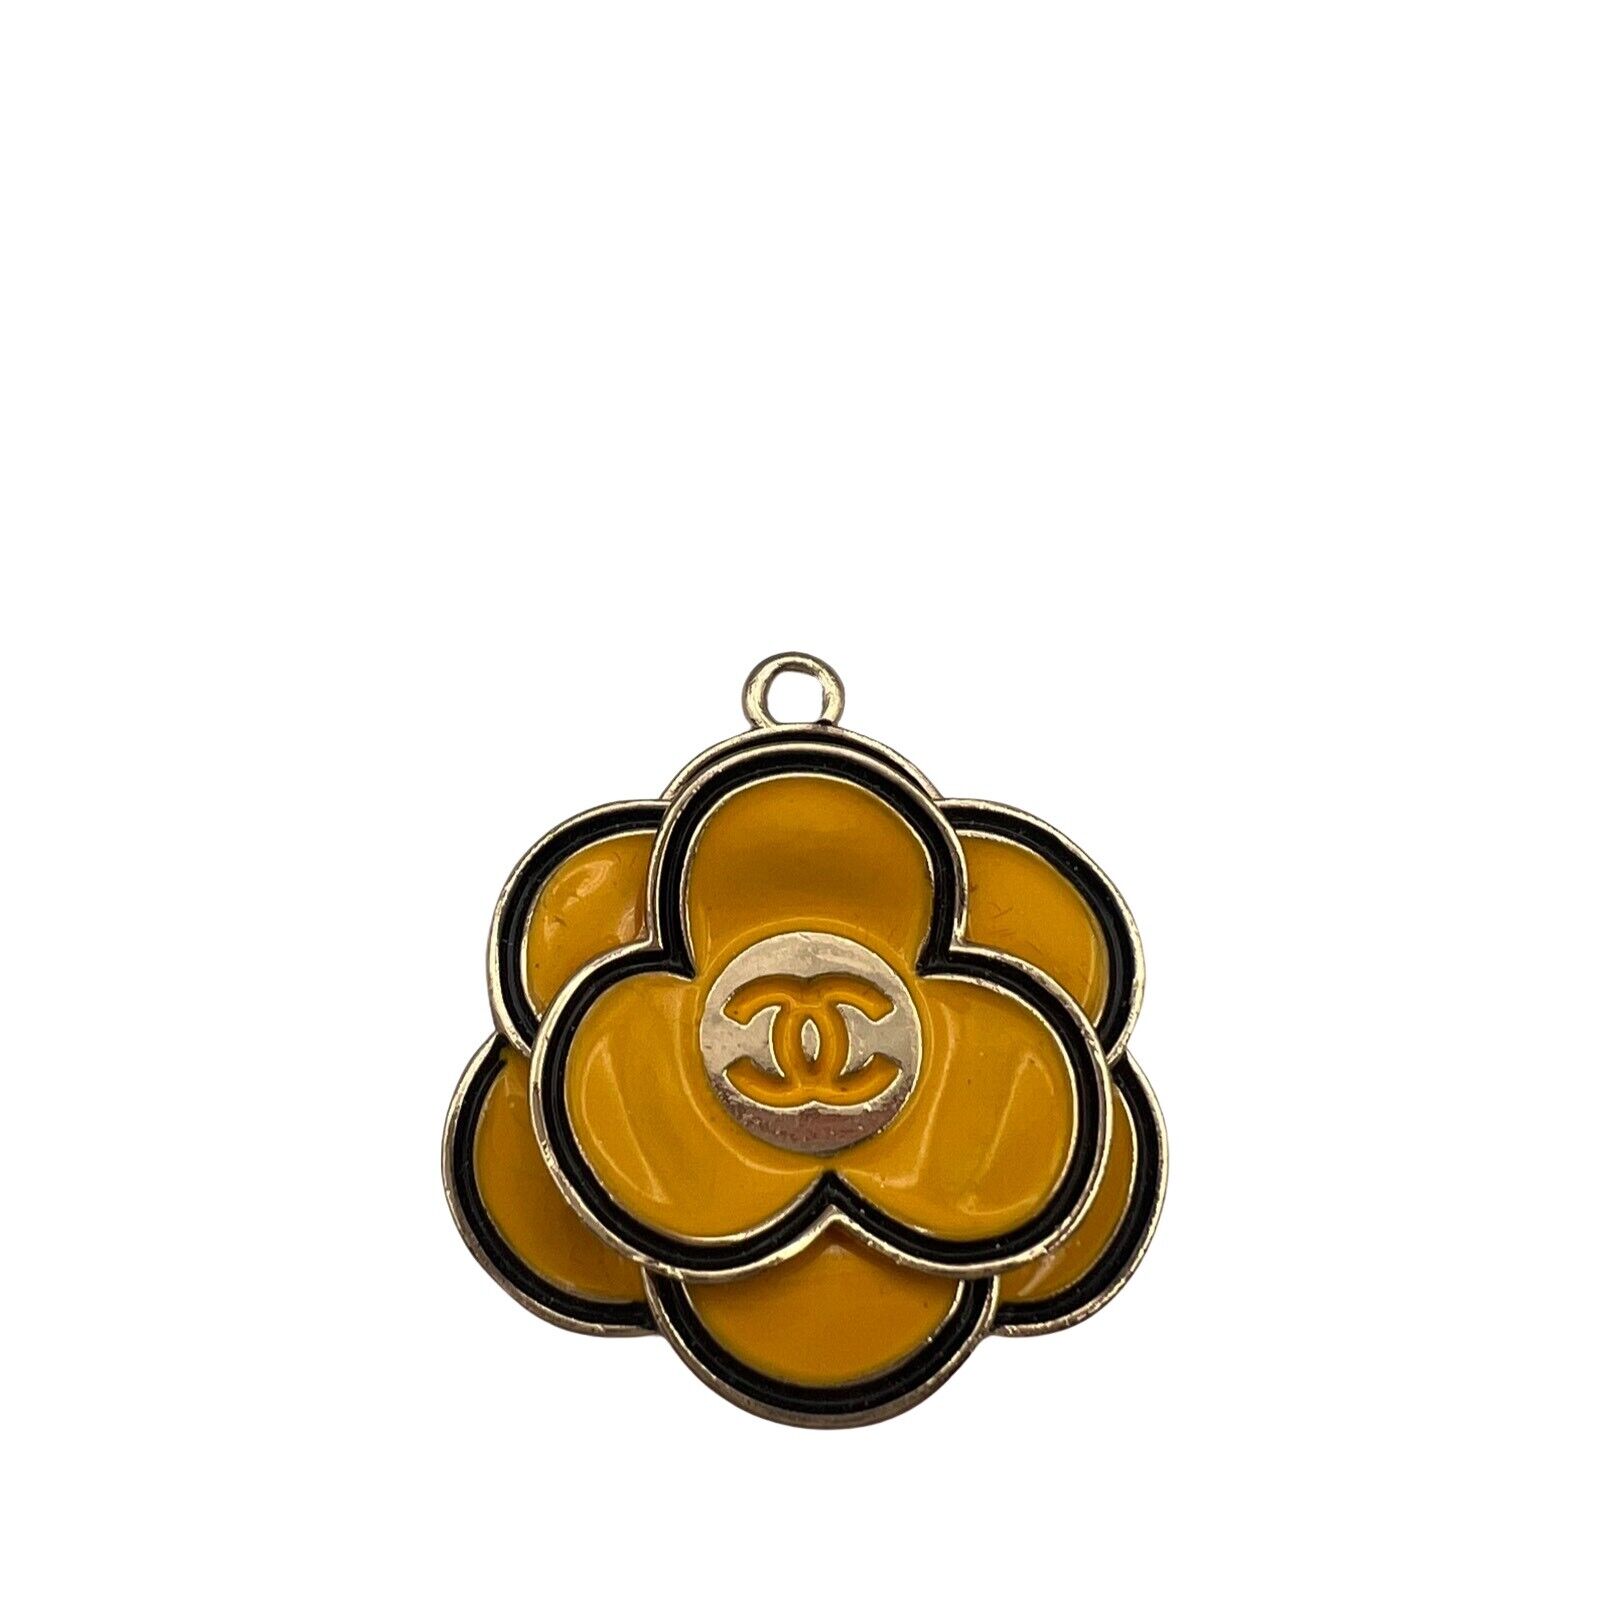 Stamped Chanel Camelia Zipper Pull Button Charm Gold Tone Yellow Flower 30mm